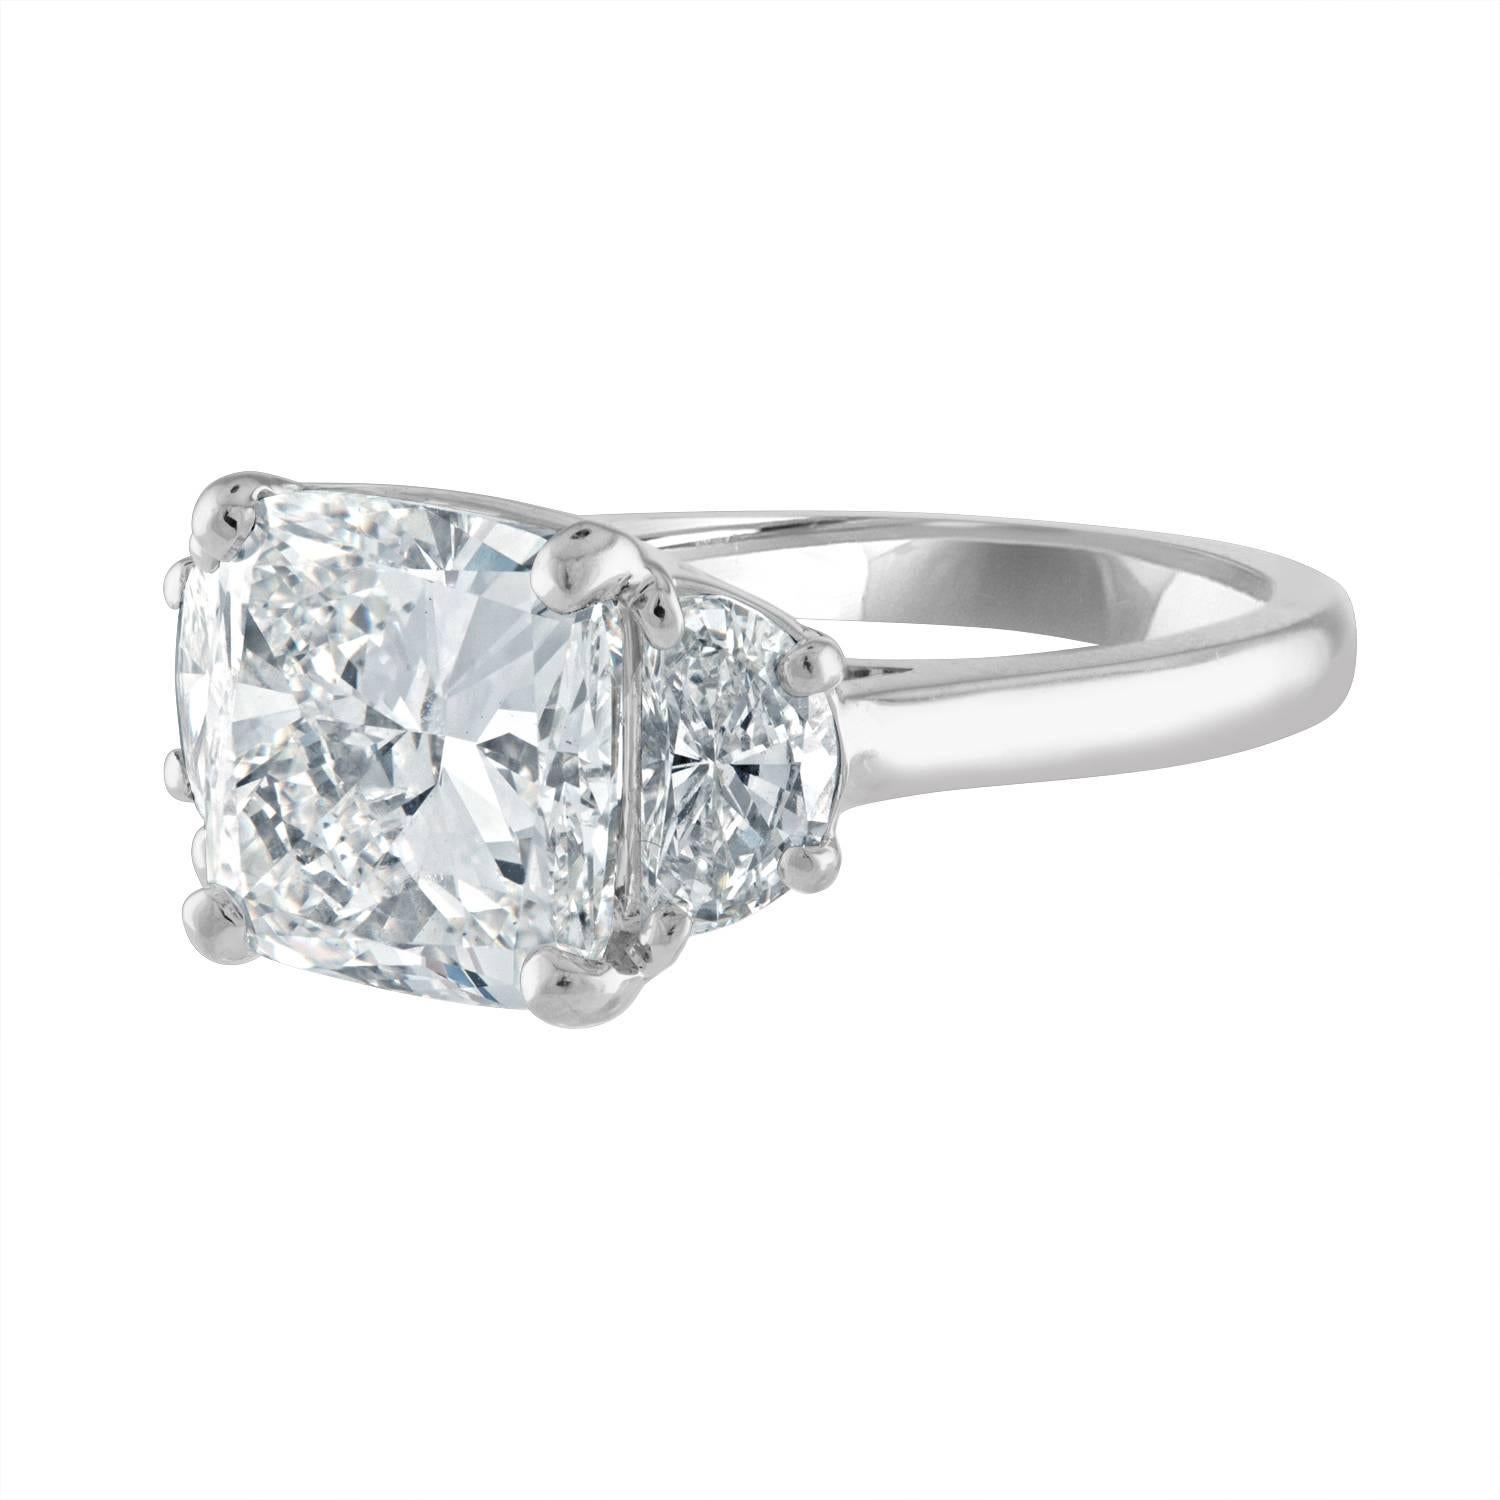 4.01 Carat Cushion Cut Diamond, Brilliant Diamond, is set in Hand Crafted Platinum Three Stone Ring Mounting. The Center is set with Two Half Moons Diamonds Weight 0.88 Carat Total Weight. The Half Moons are Estimated to be H in Color & SI in